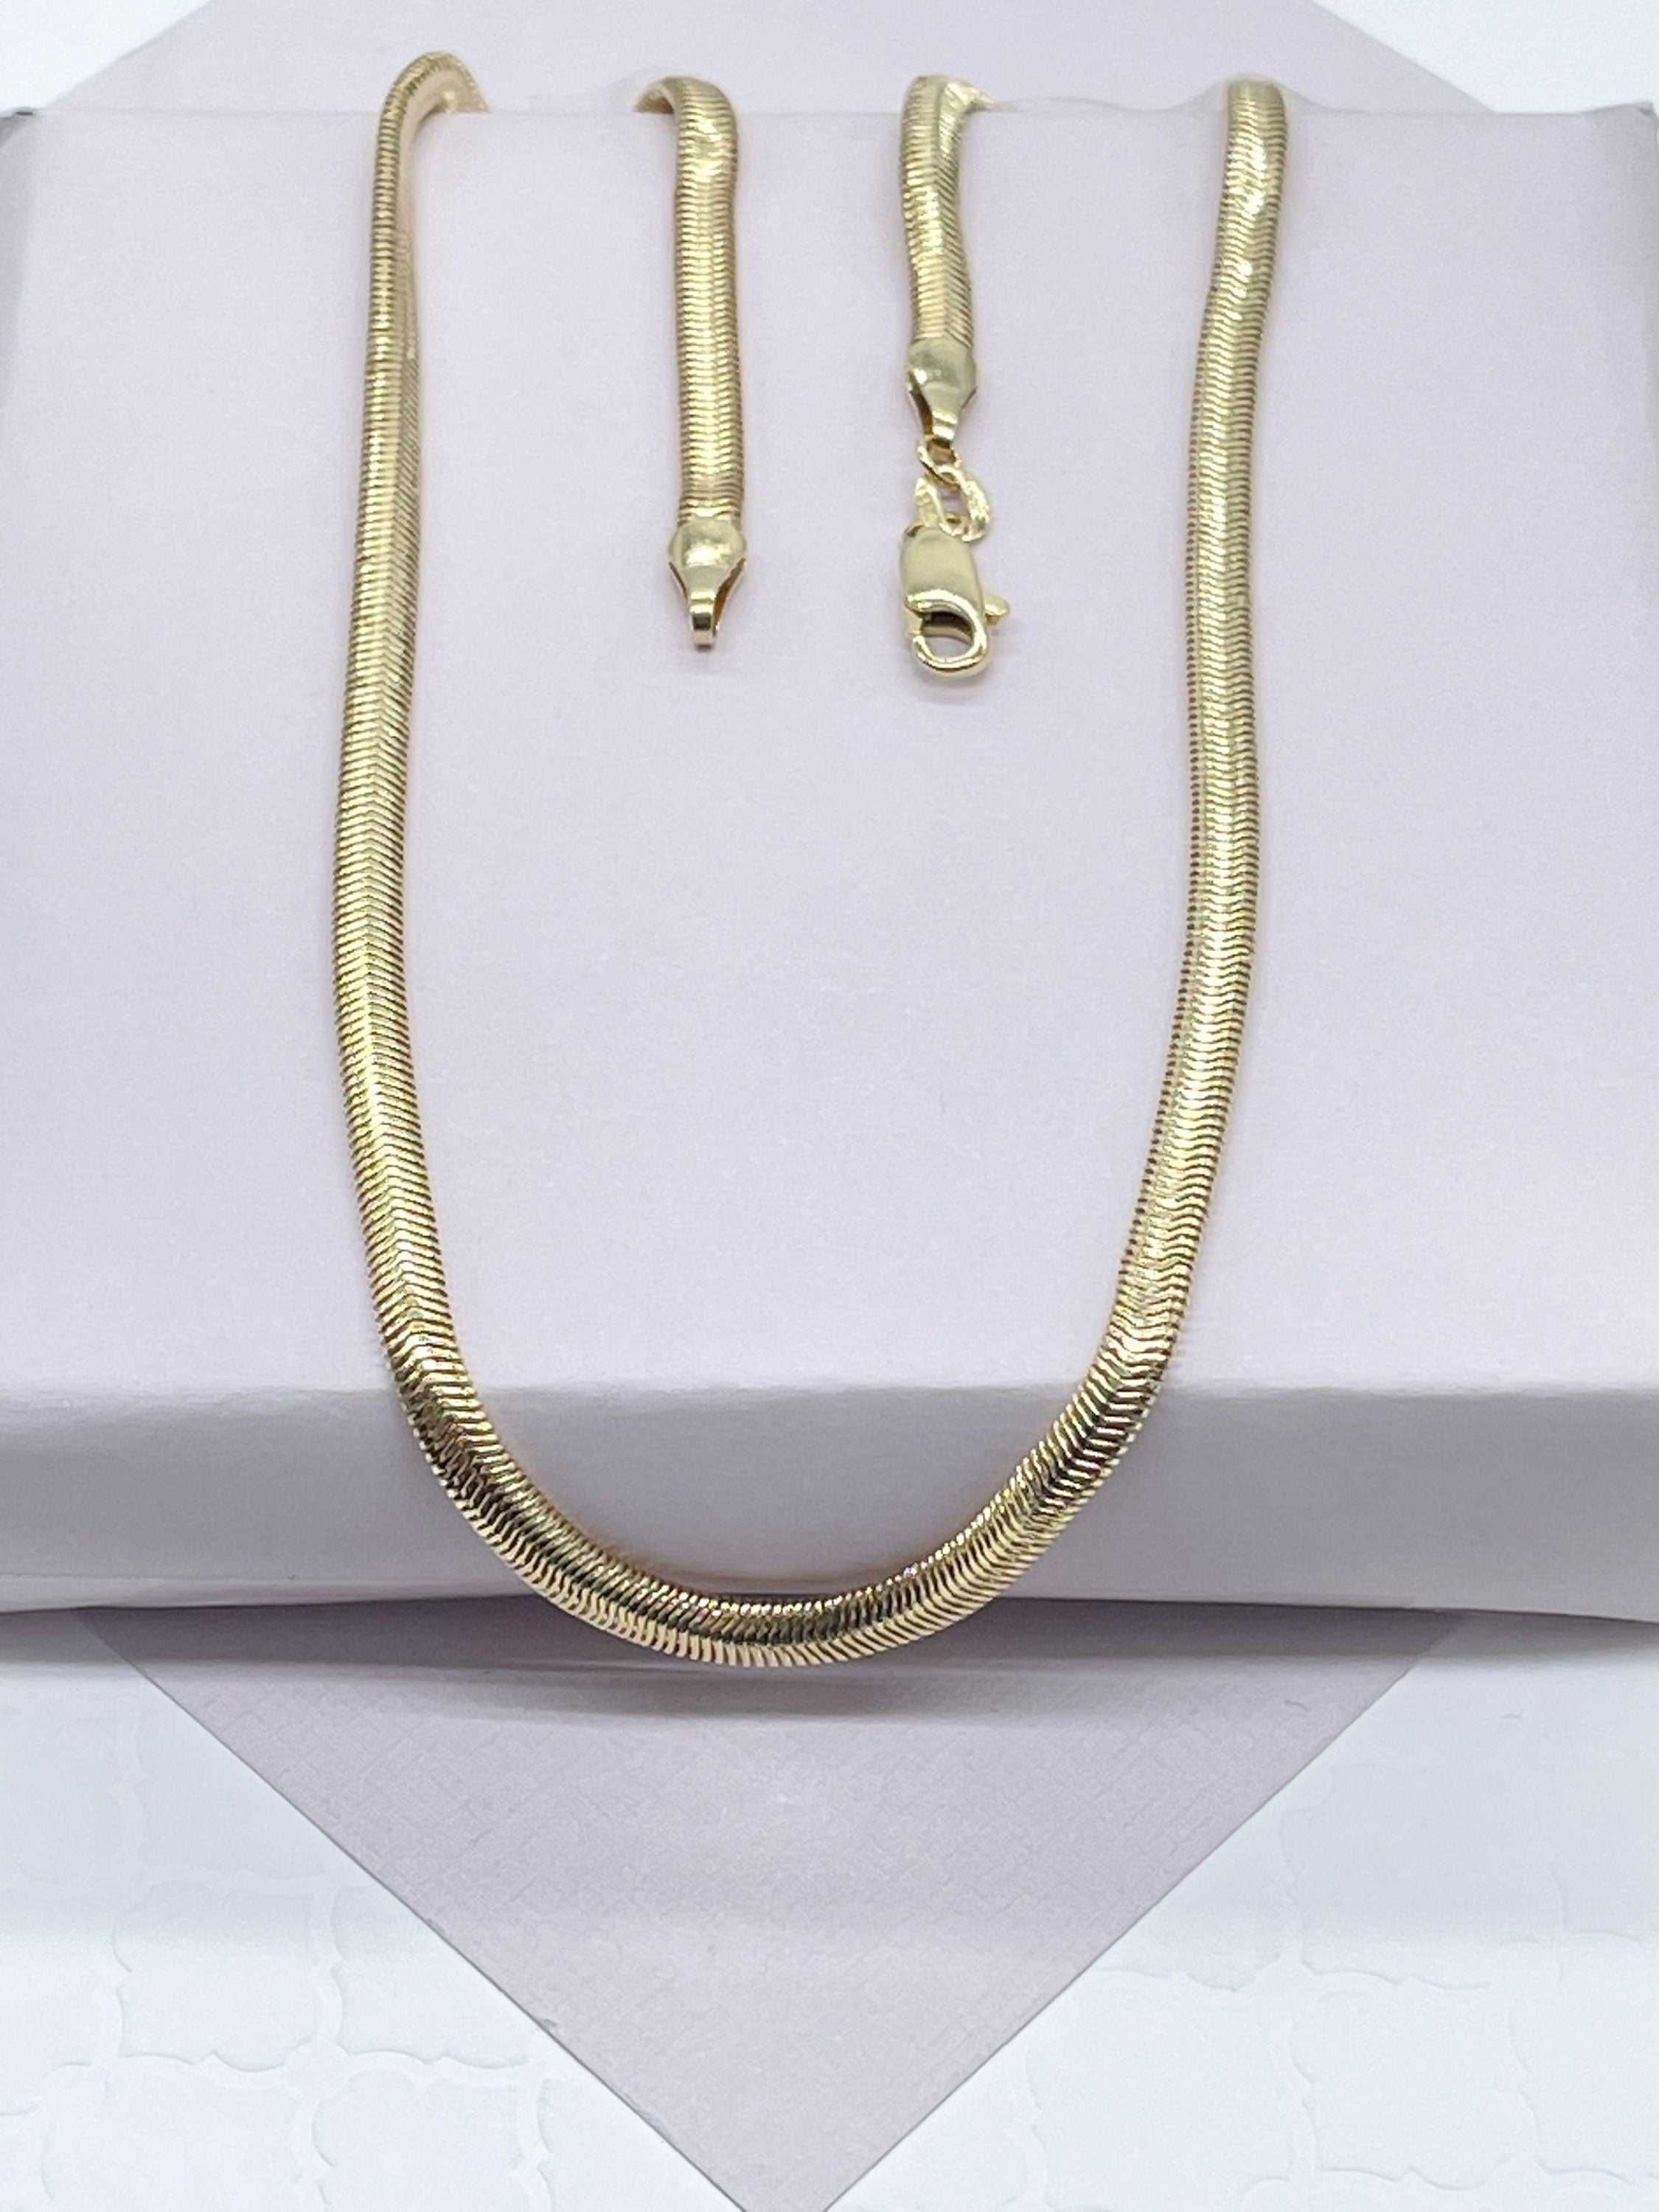 SOLID 14K YELLOW GOLD FLAT SNAKE CHAIN 16 INCH 3mm HERRINGBONE OMEGA  NECKLACE